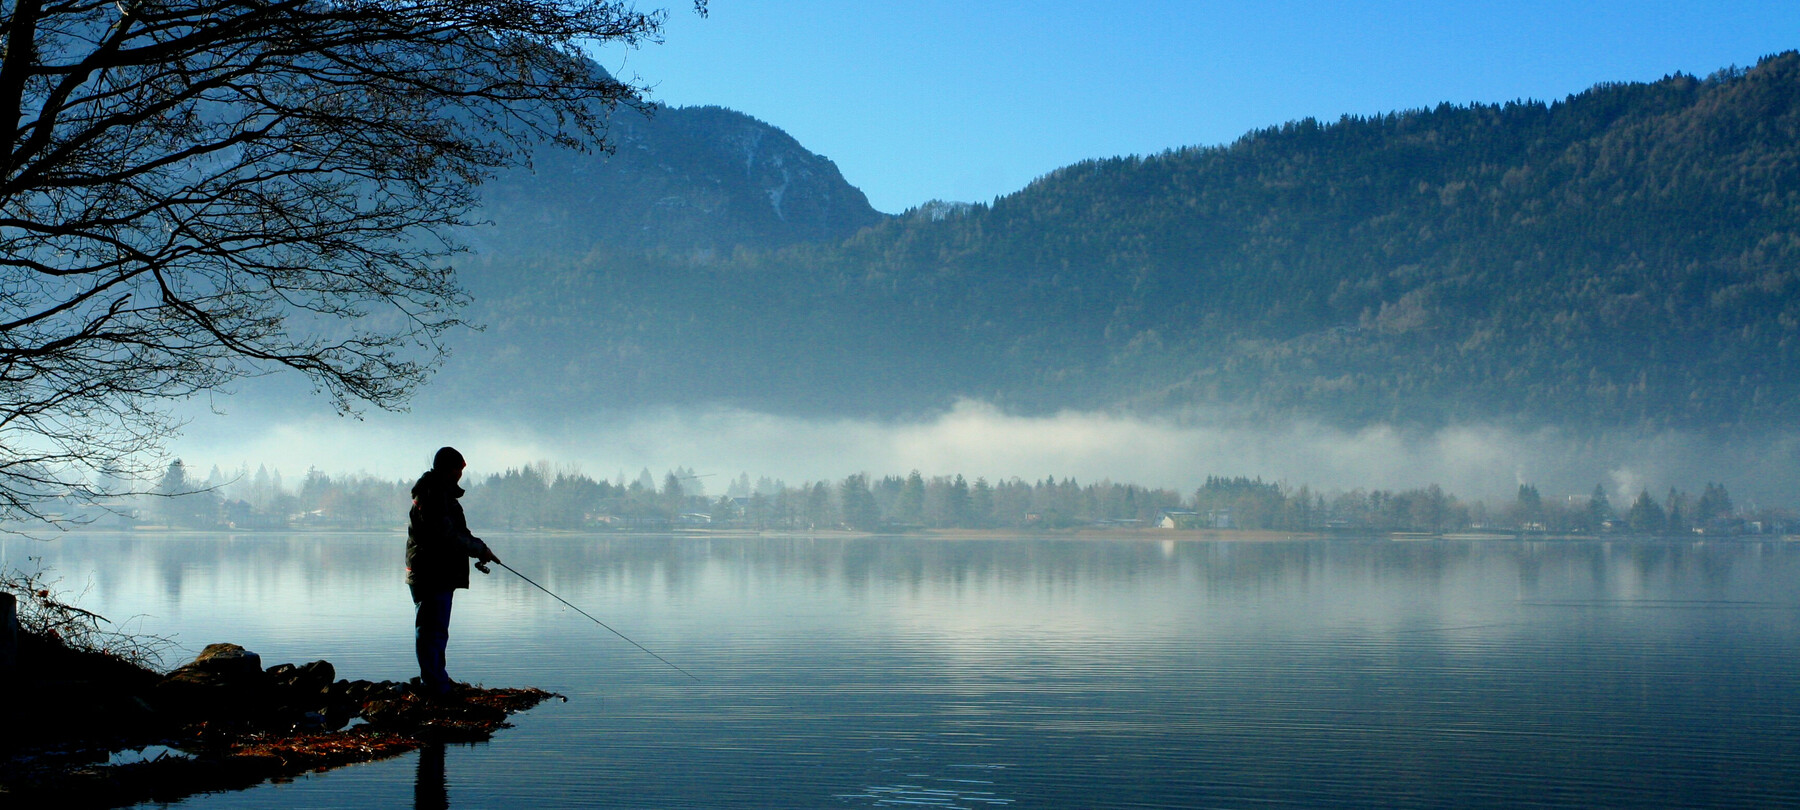 The lakes in Trentino: the story of Walter, the fisherman from Levico